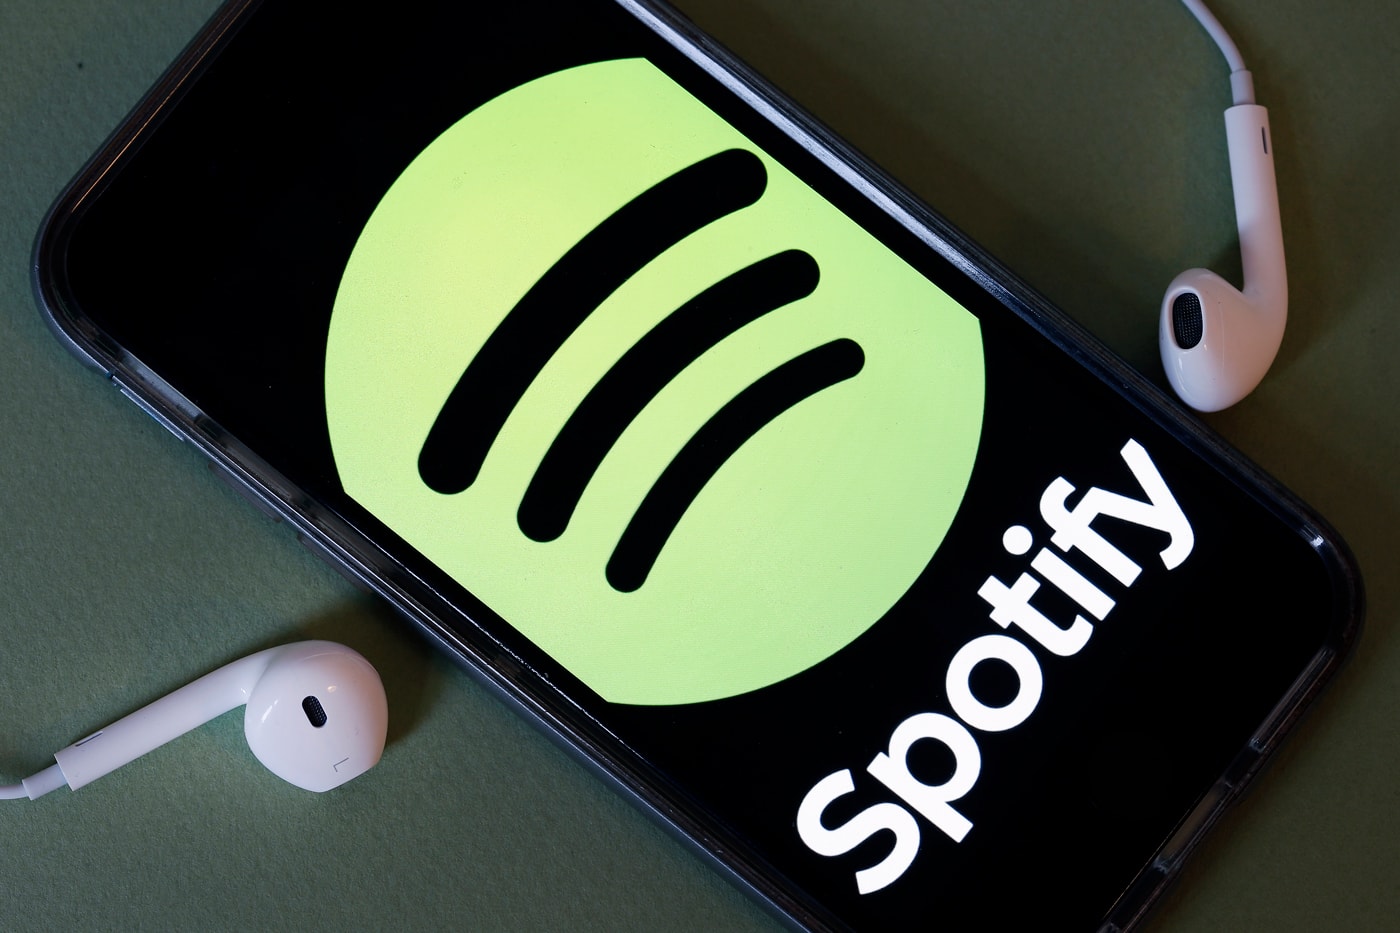 Spotify Stock Debuts 165 90 USD dollars Share Company valuation 30 billion nyse new york stock exchange april 3 2018